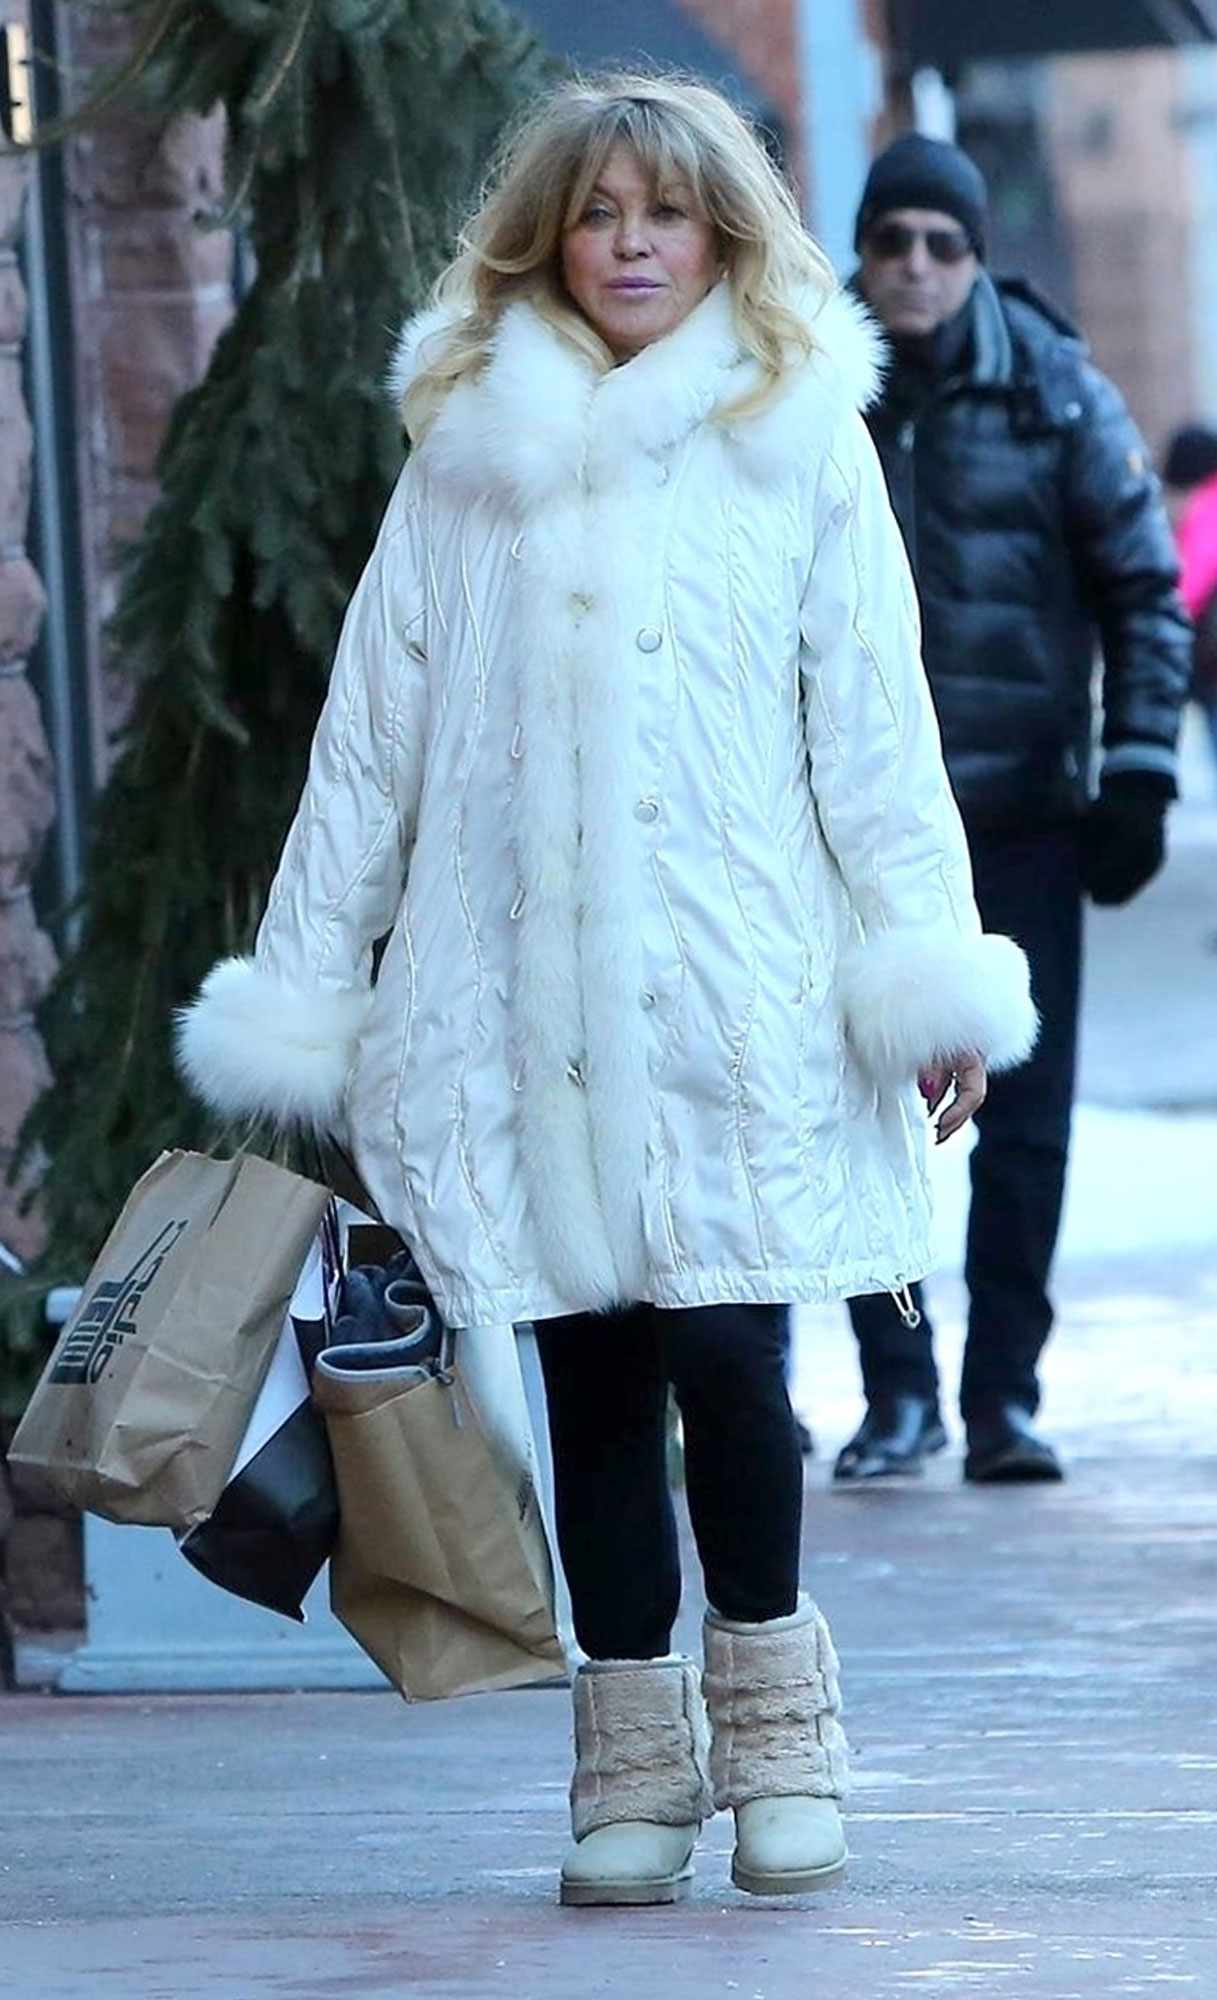 Goldie Hawn goes shopping alone ahead of Christmas in Aspen